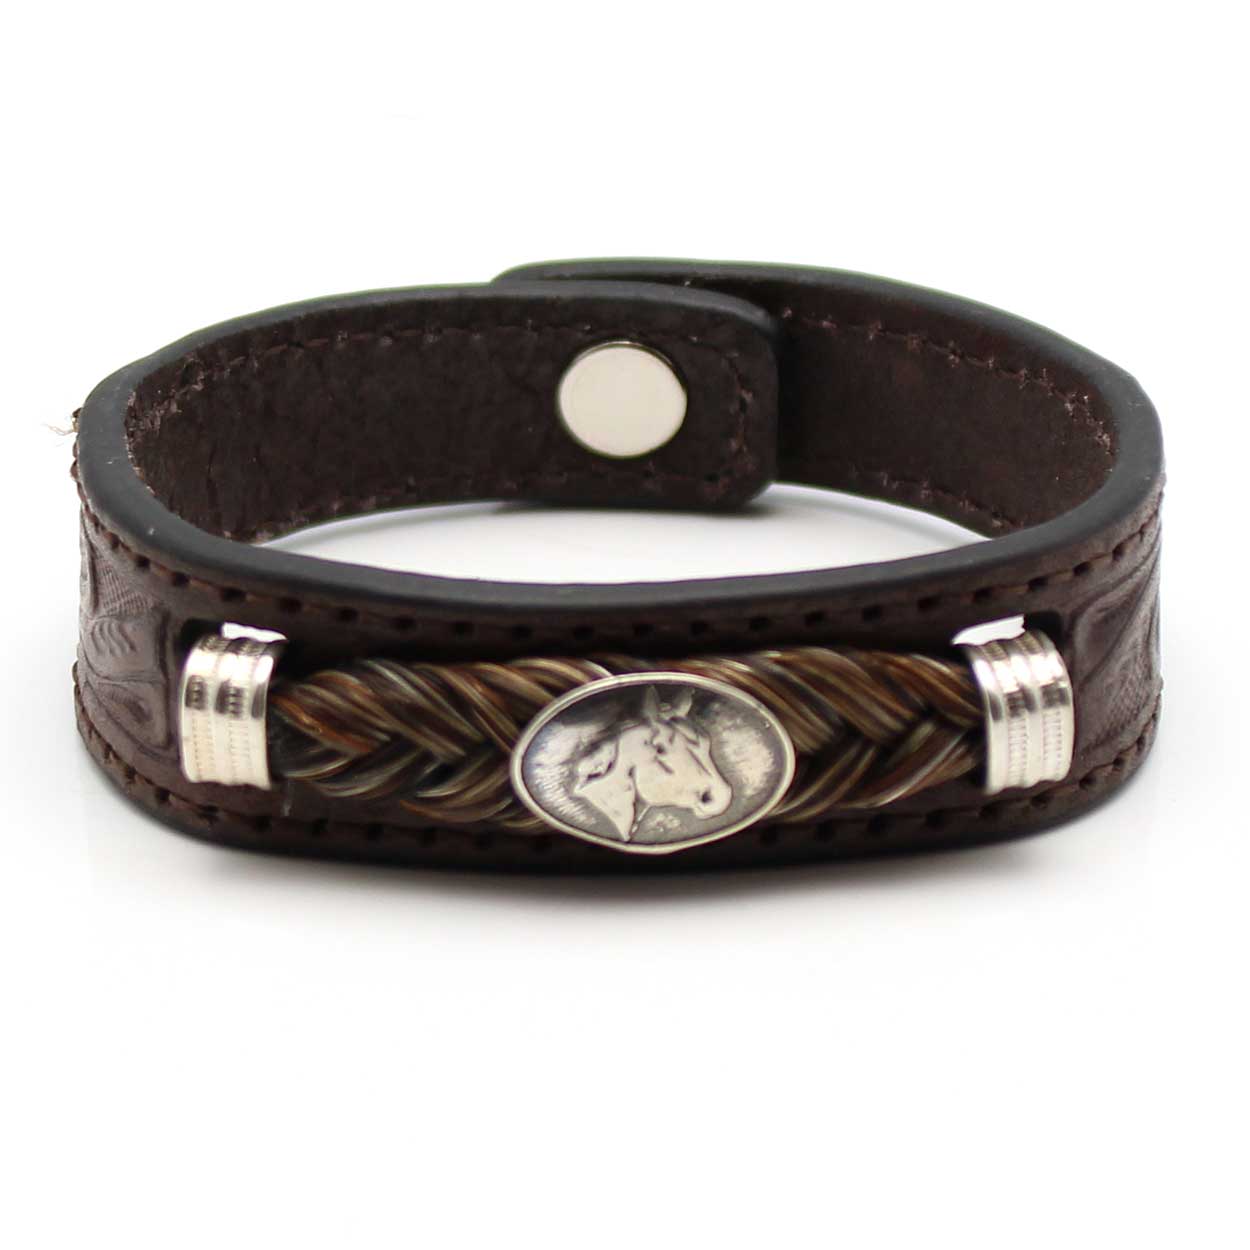 Mixed Color Horse & Tooled Leather Bracelet With Concho - Size Small 7"